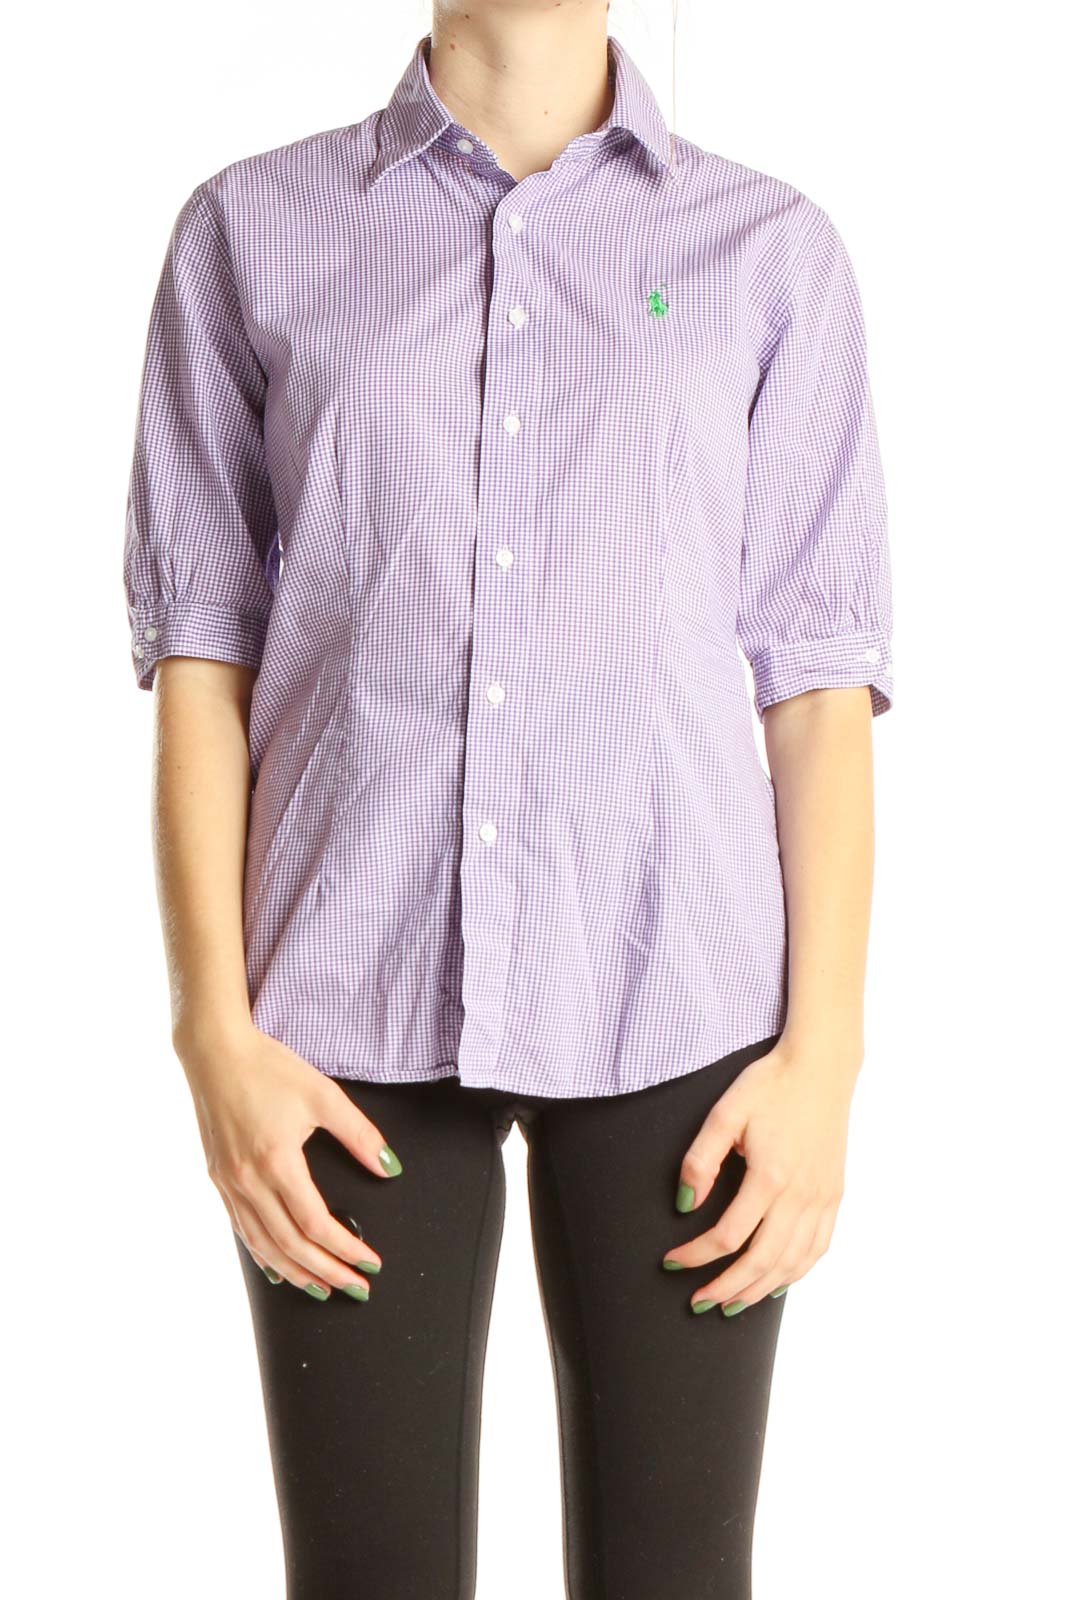 Purple Striped Formal Top Front